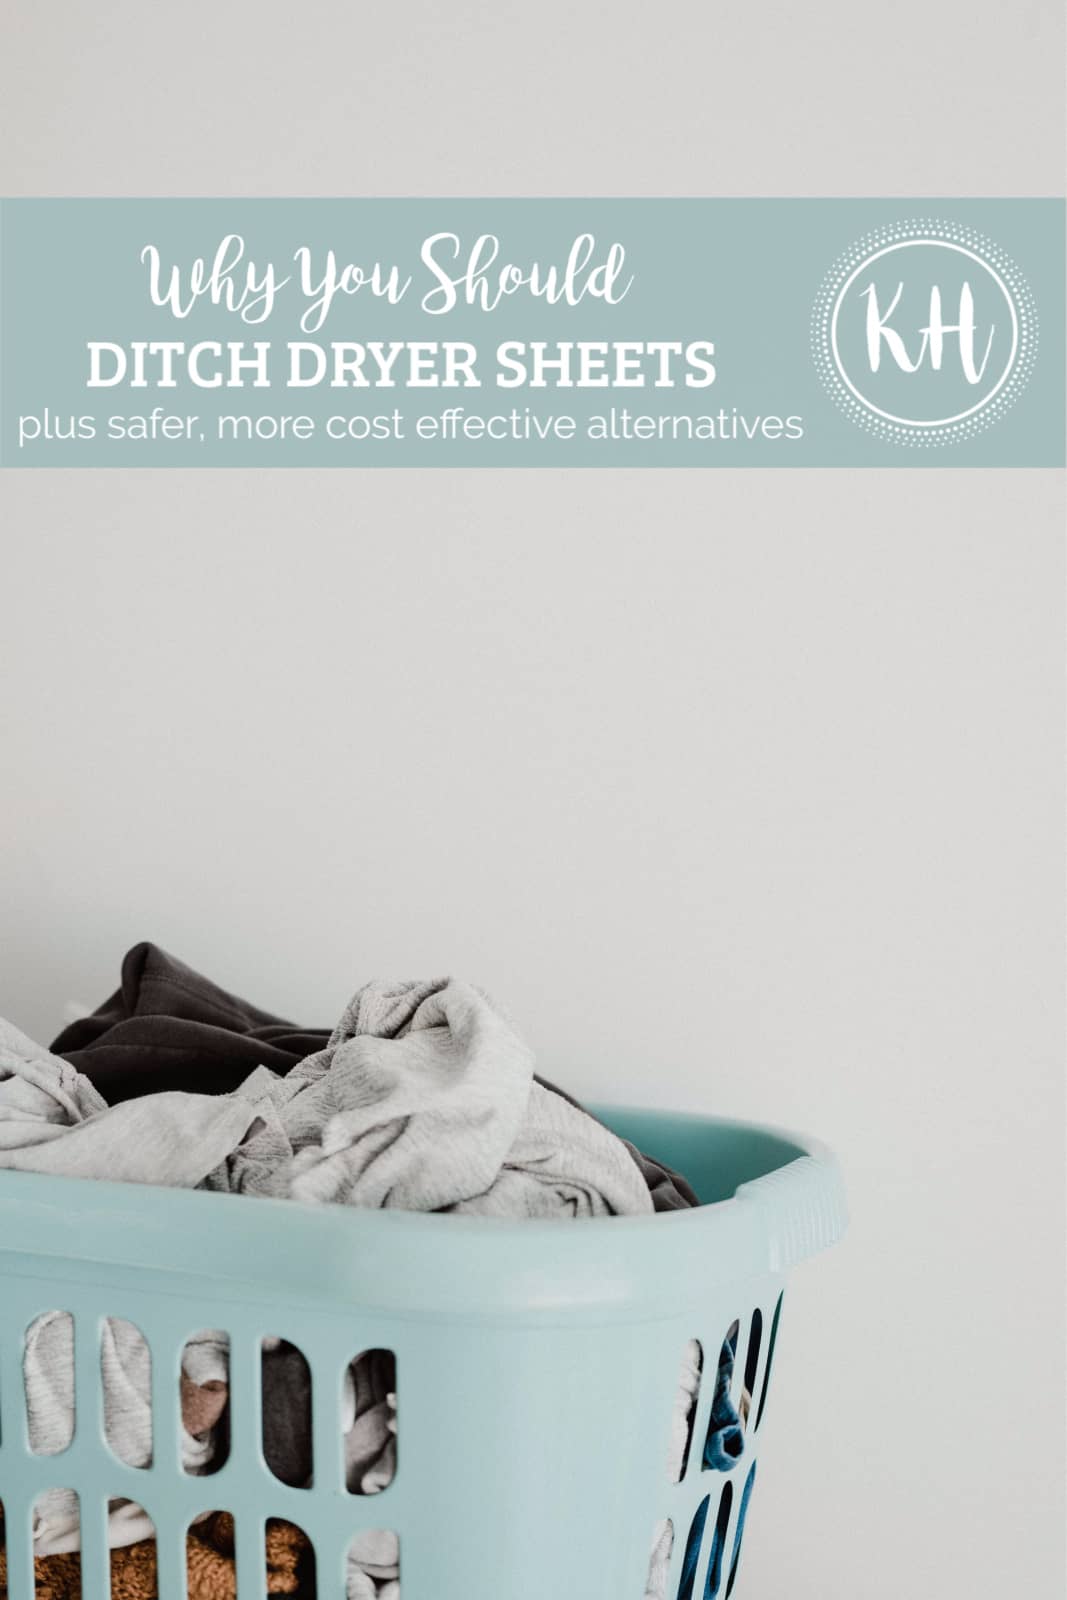 https://hungryfoodie.com/wp-content/uploads/2020/05/Why-You-Should-Ditch-Dryer-Sheets.KH1_-1.jpg